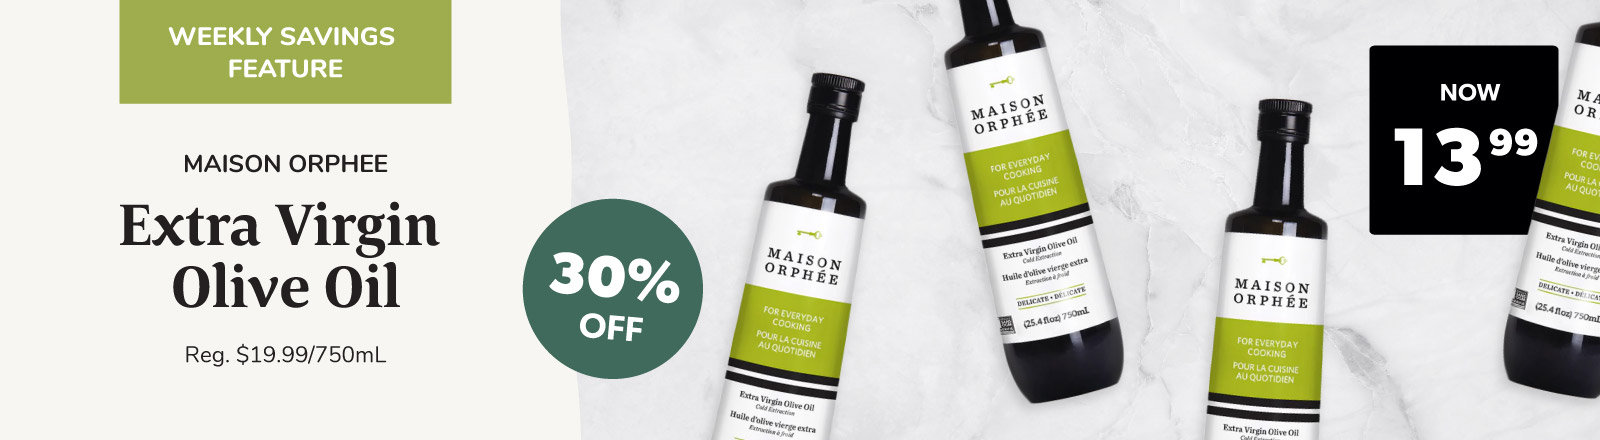 Save on olive oil this week 